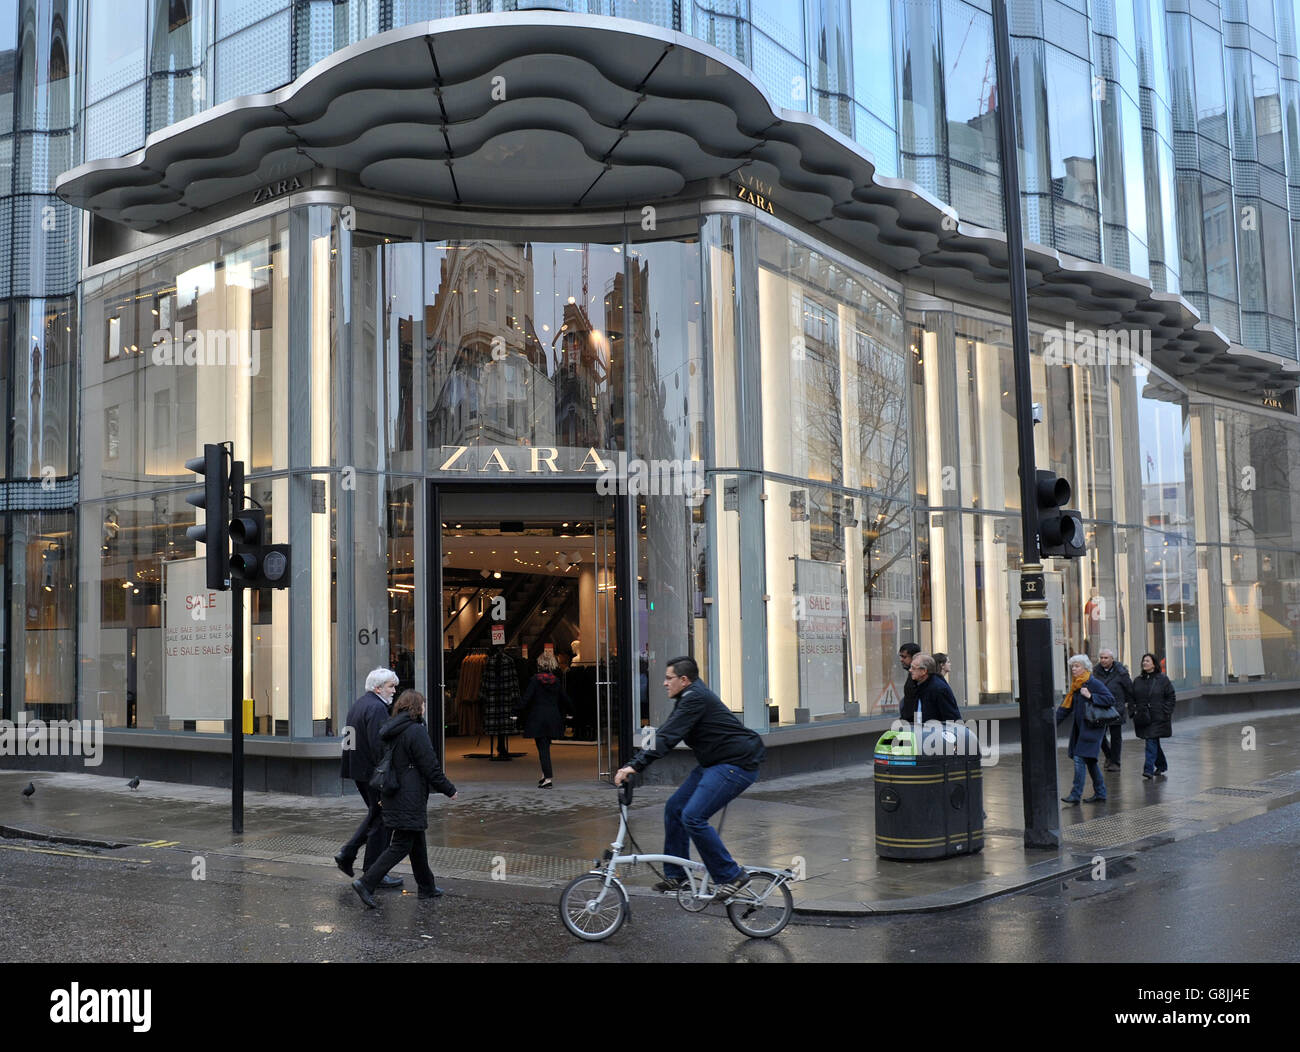 The zara store in oxford street hi-res stock photography and images - Alamy